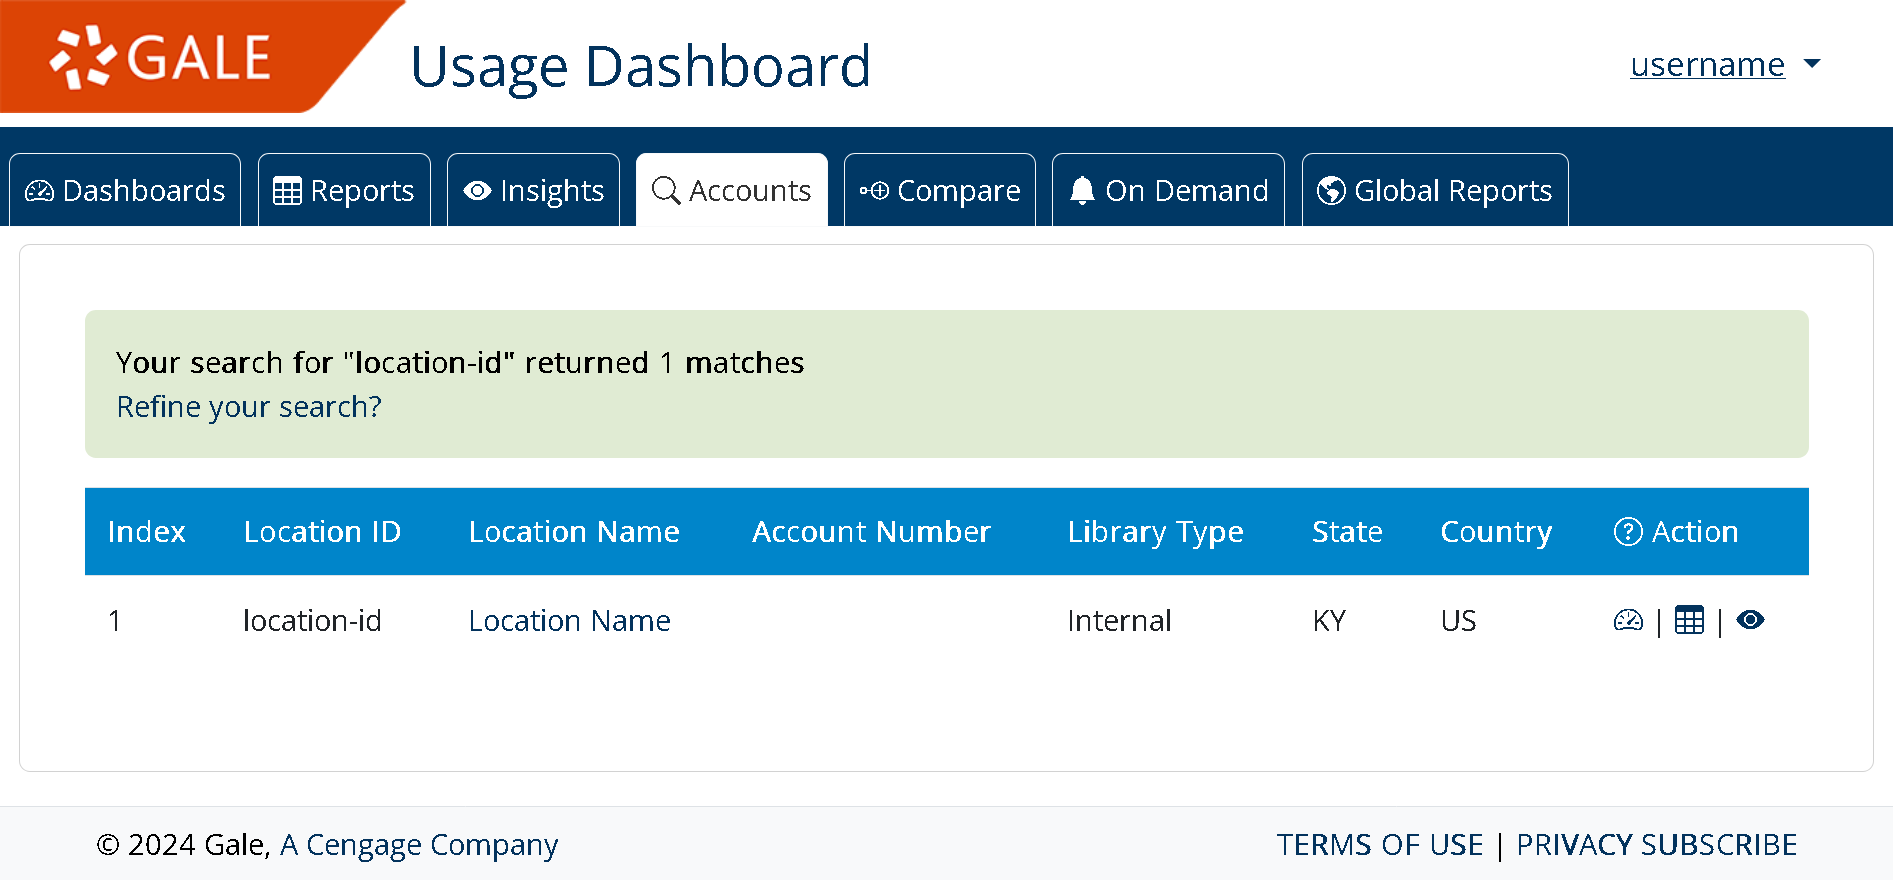 Usage Dashboard Accounts Search Results